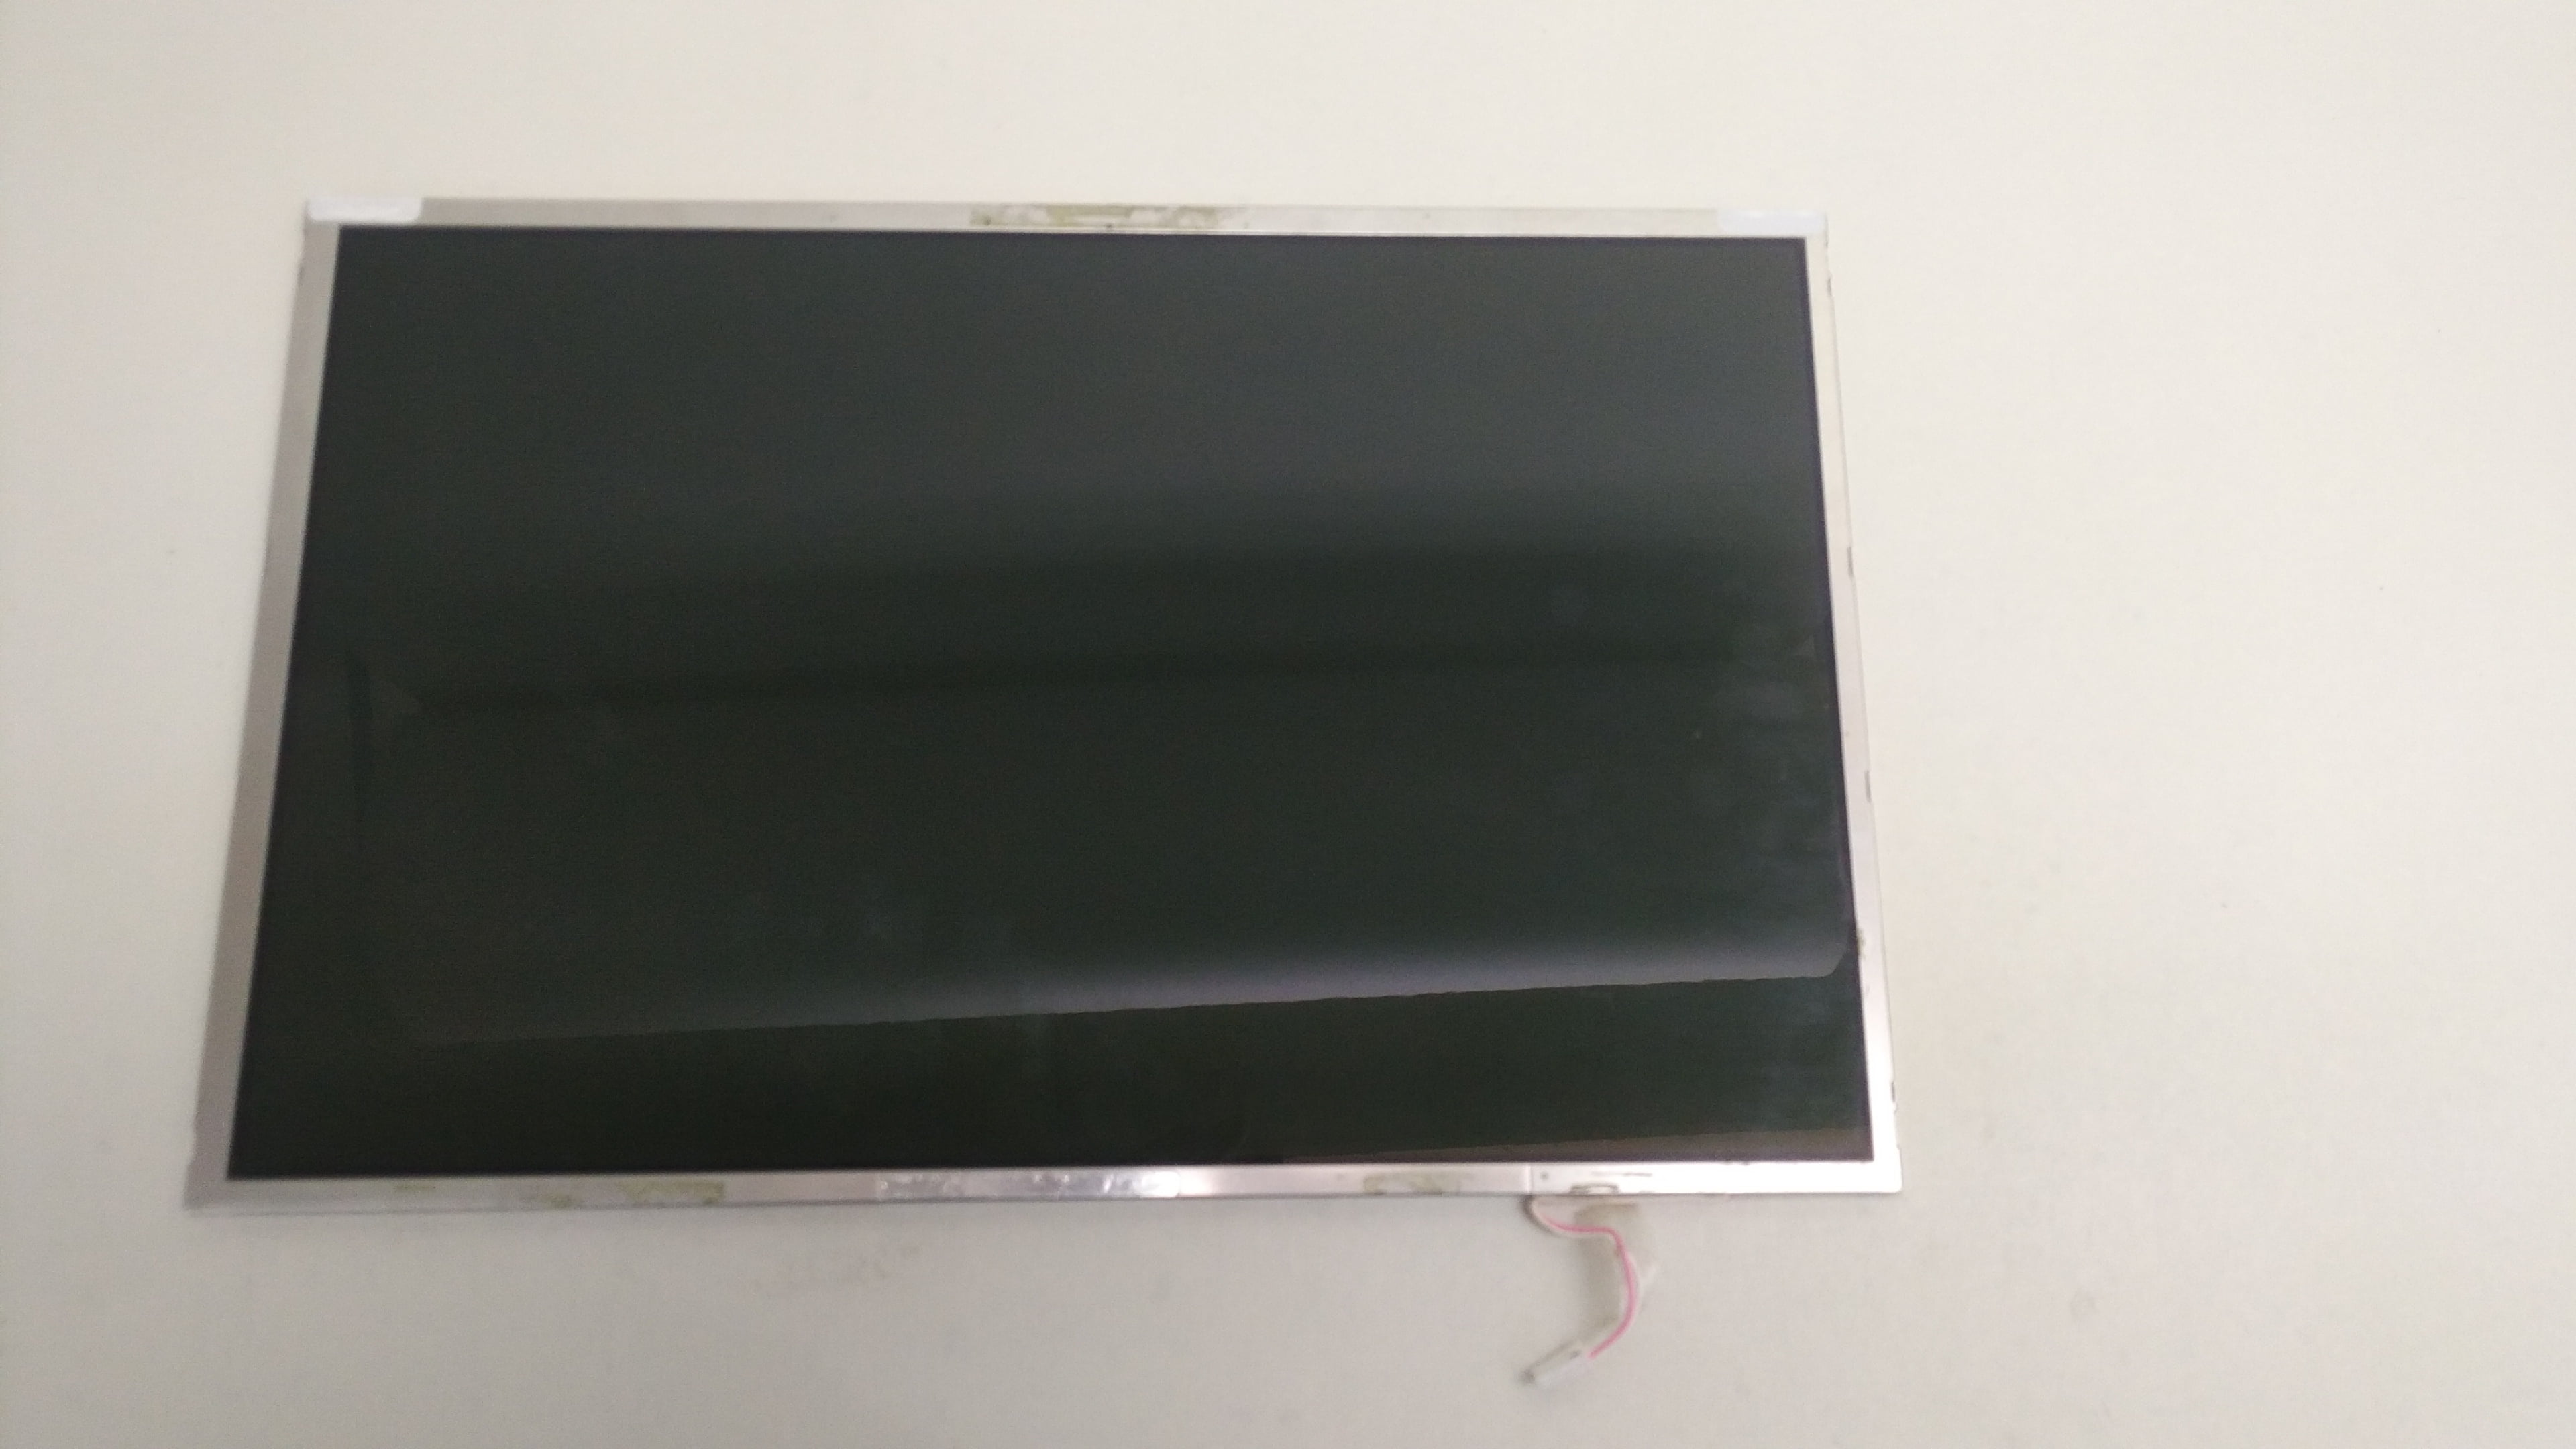 15 inch Display LCD Cable 29-UD4054-51 for Gericom Hummer 2430e 2440e 26640 2840e Series